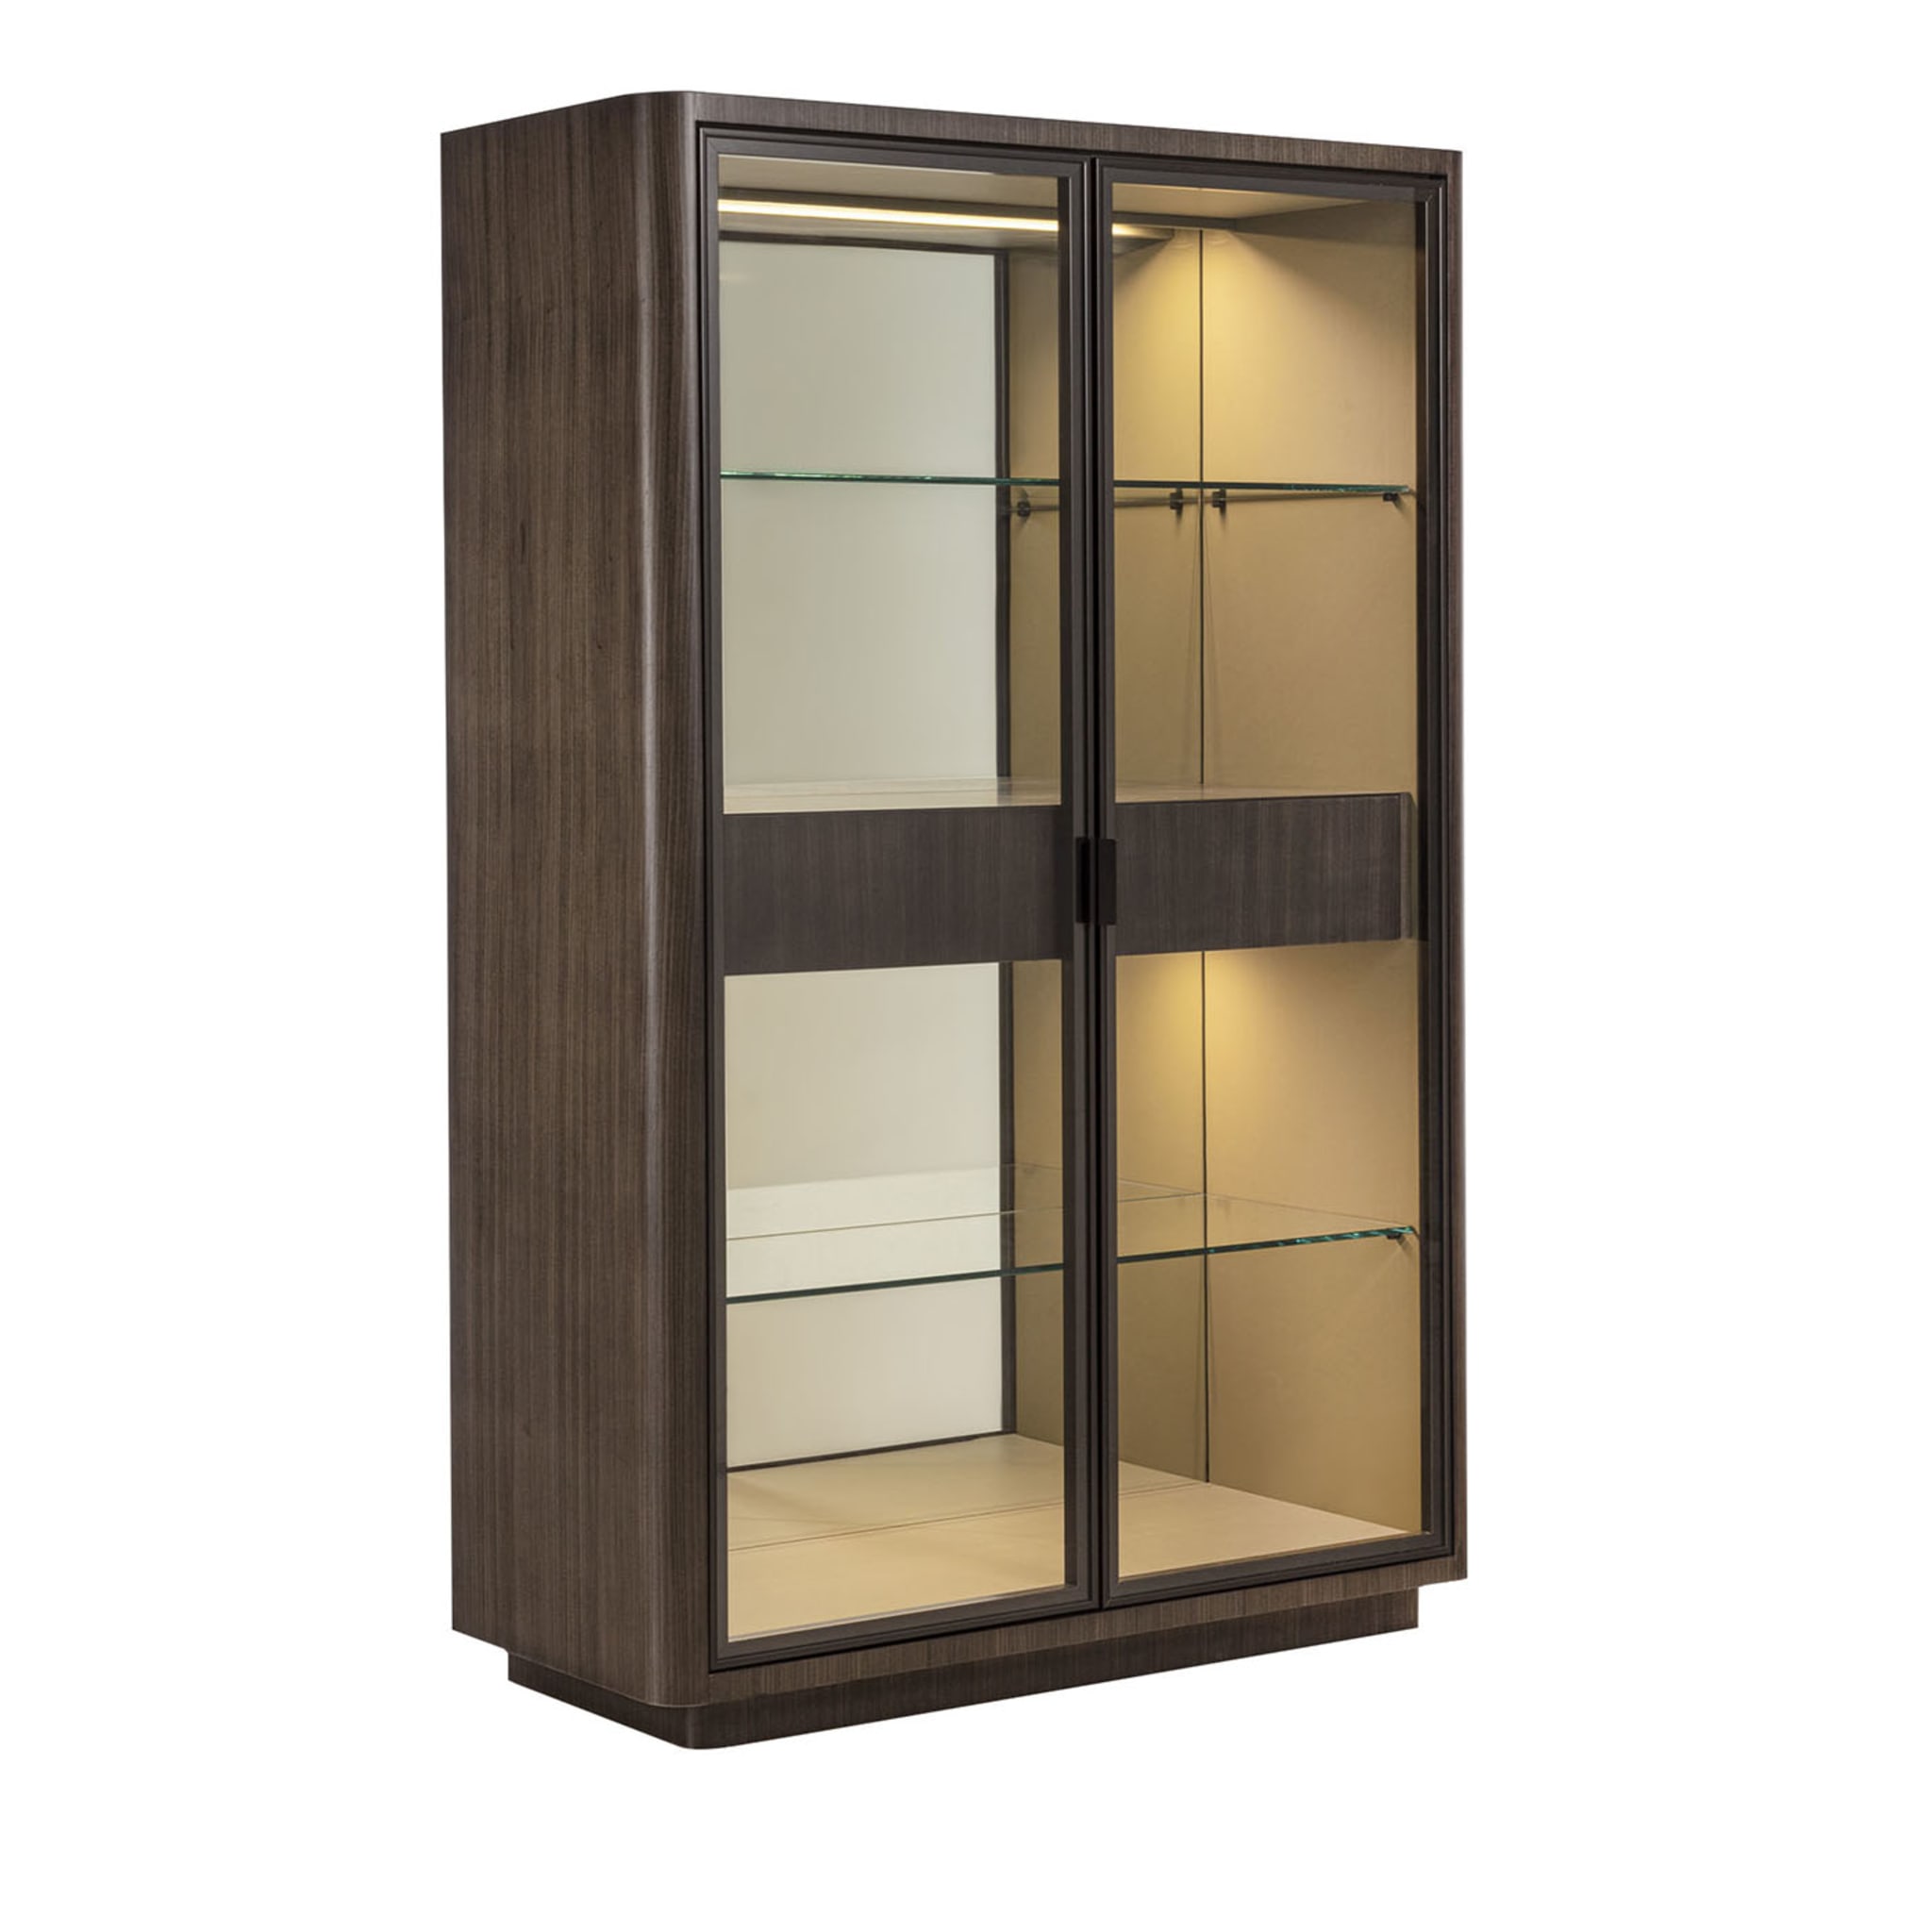 Dafne Glass Cabinet With Drawers - Main view